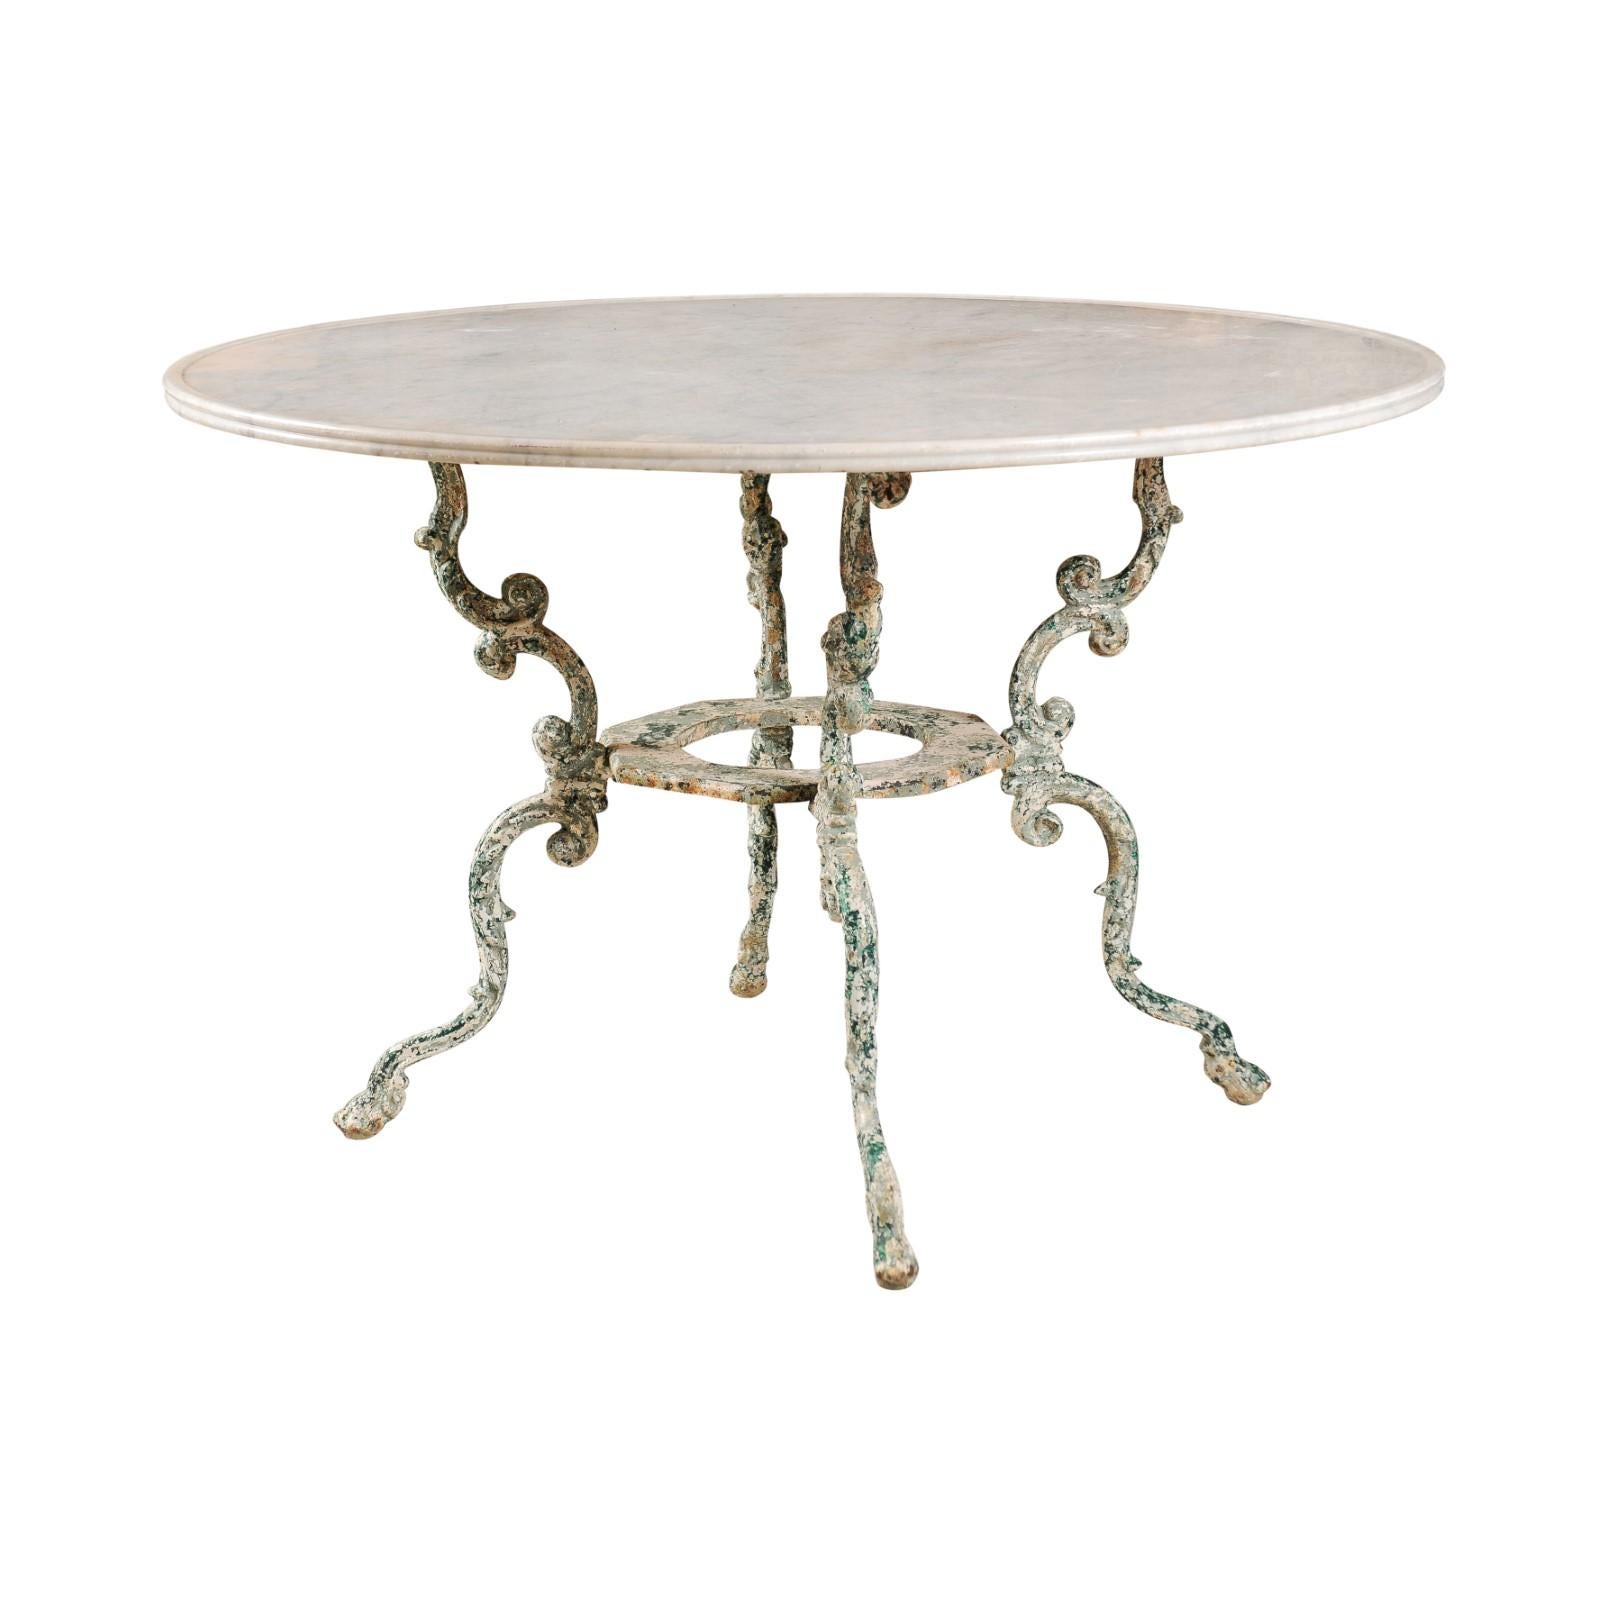 French 1810s Painted Wrought-Iron Table with Round Marble Top and Scrolled Legs